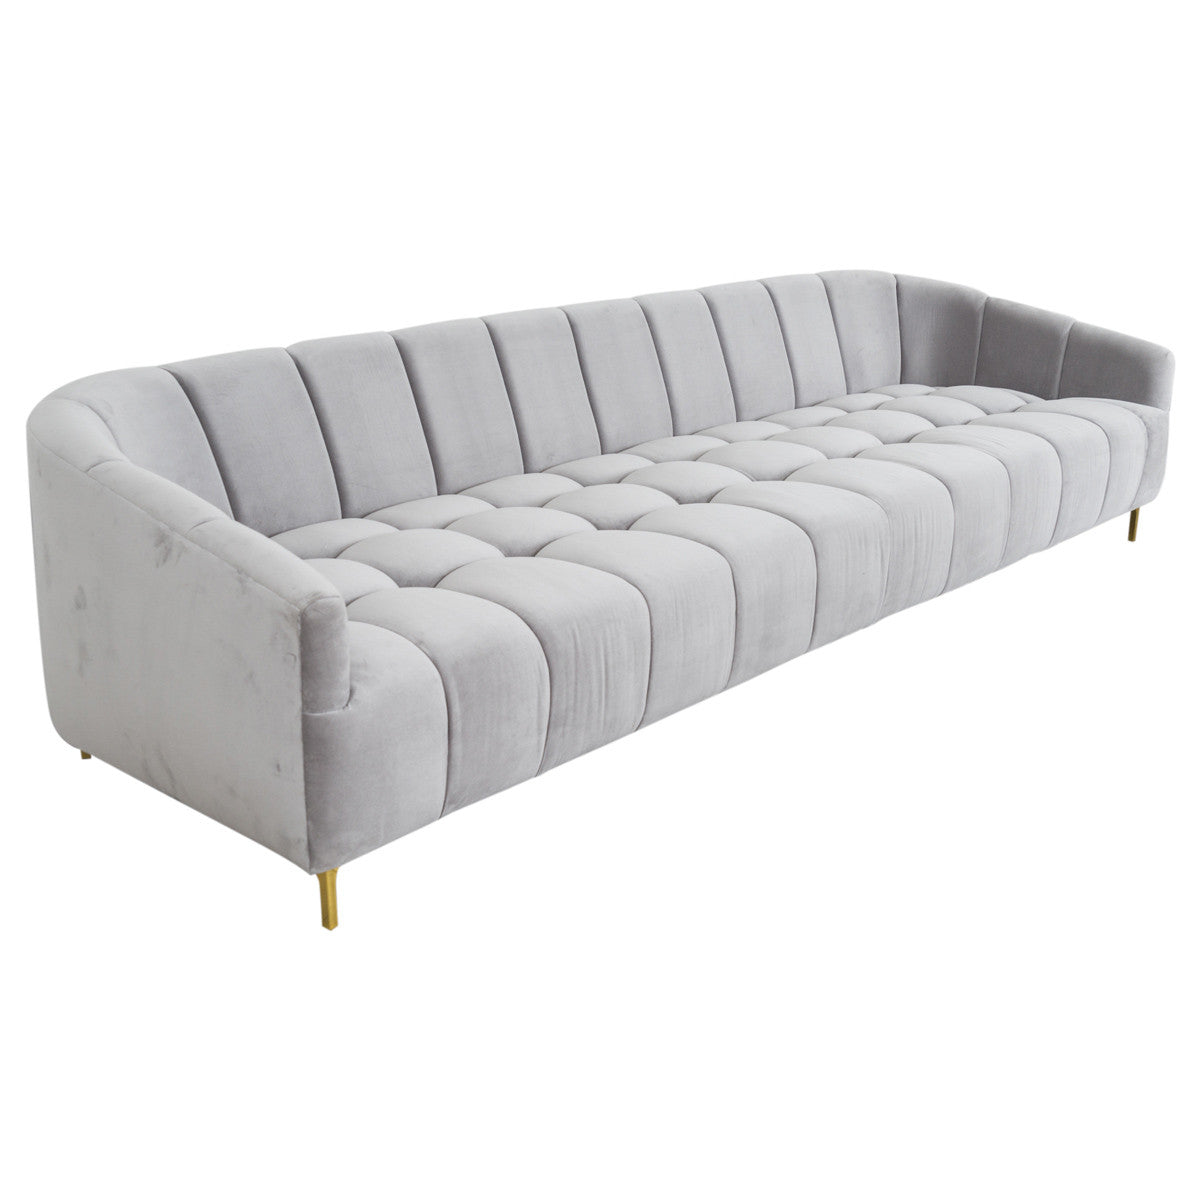 Flash chef linnen St. Barts Sofa with Tufting in Velvet - ModShop